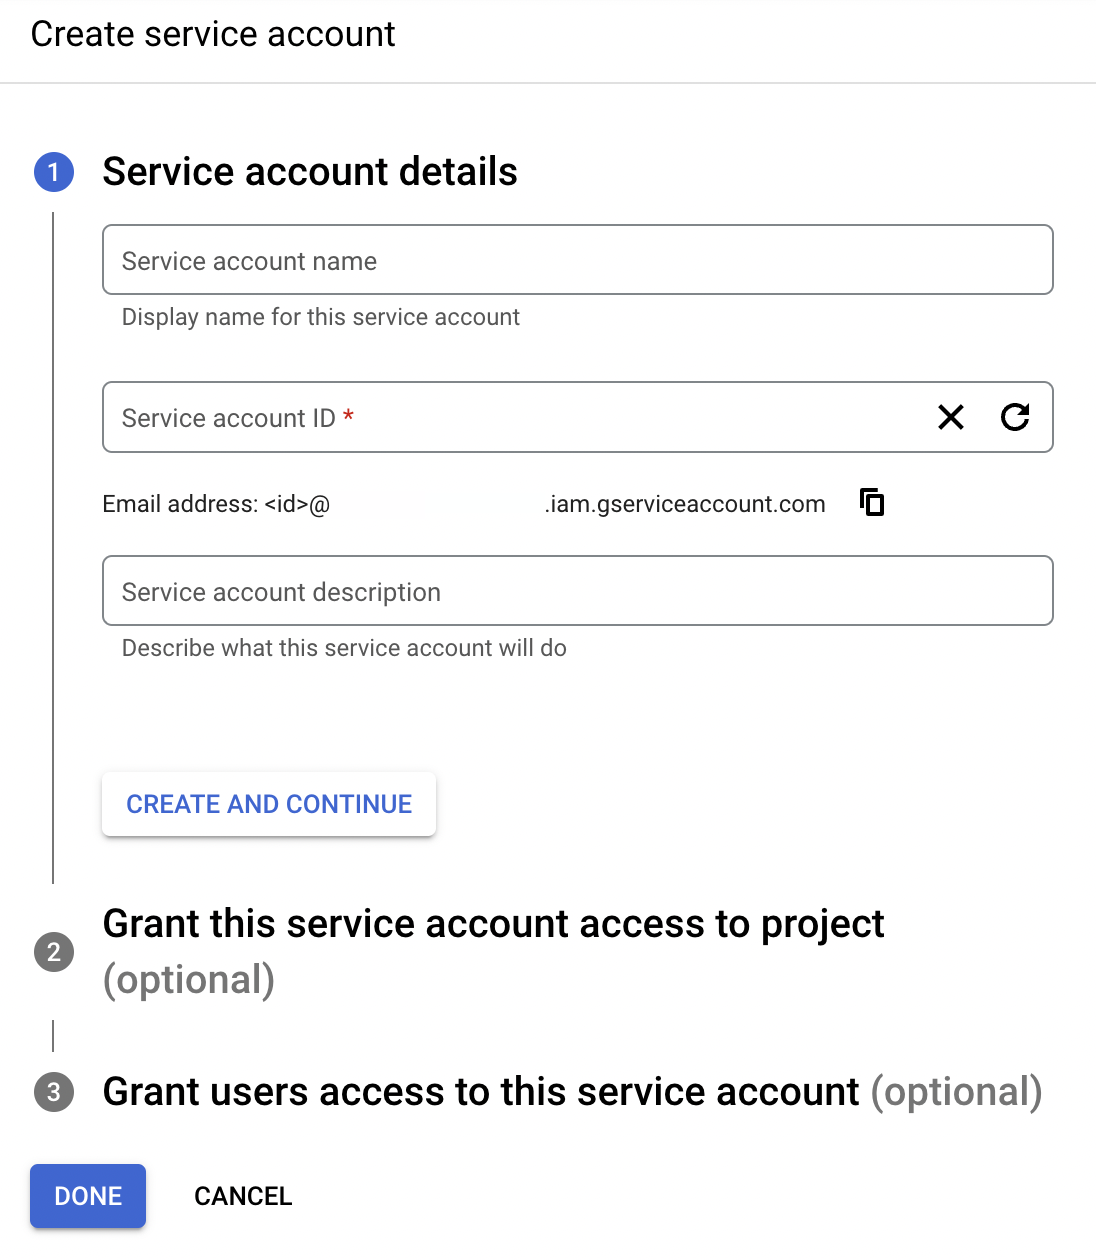 Set a service account name and description. Click Create and Continue. Skip through optional steps 2 and 3.